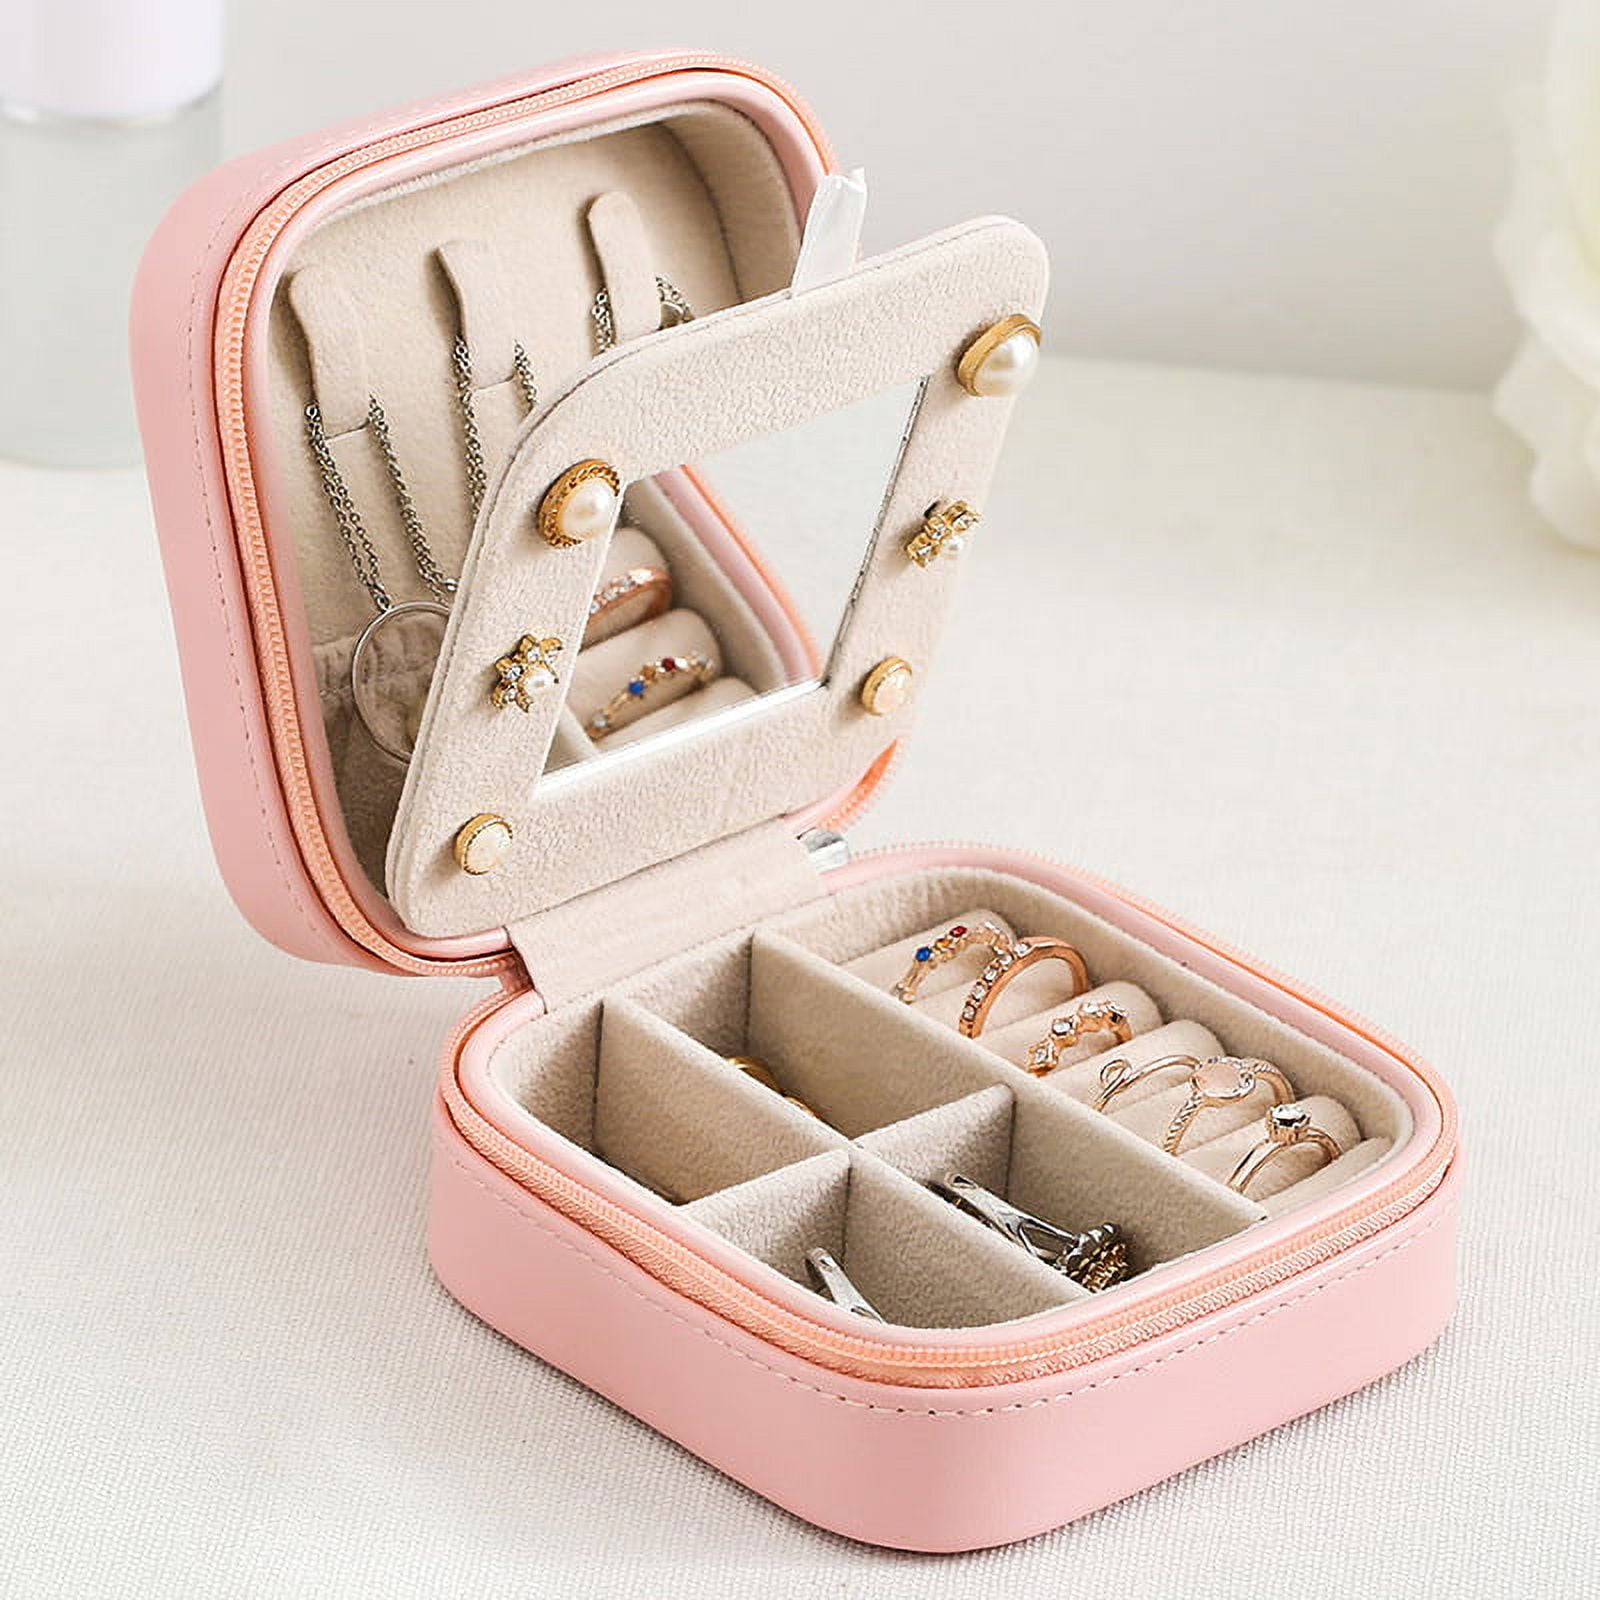 Small Travel Jewelry Organizer Case With Mirror, Storage Box For Rings  Earrings Necklaces, Gifts For Women, Metallic : Target